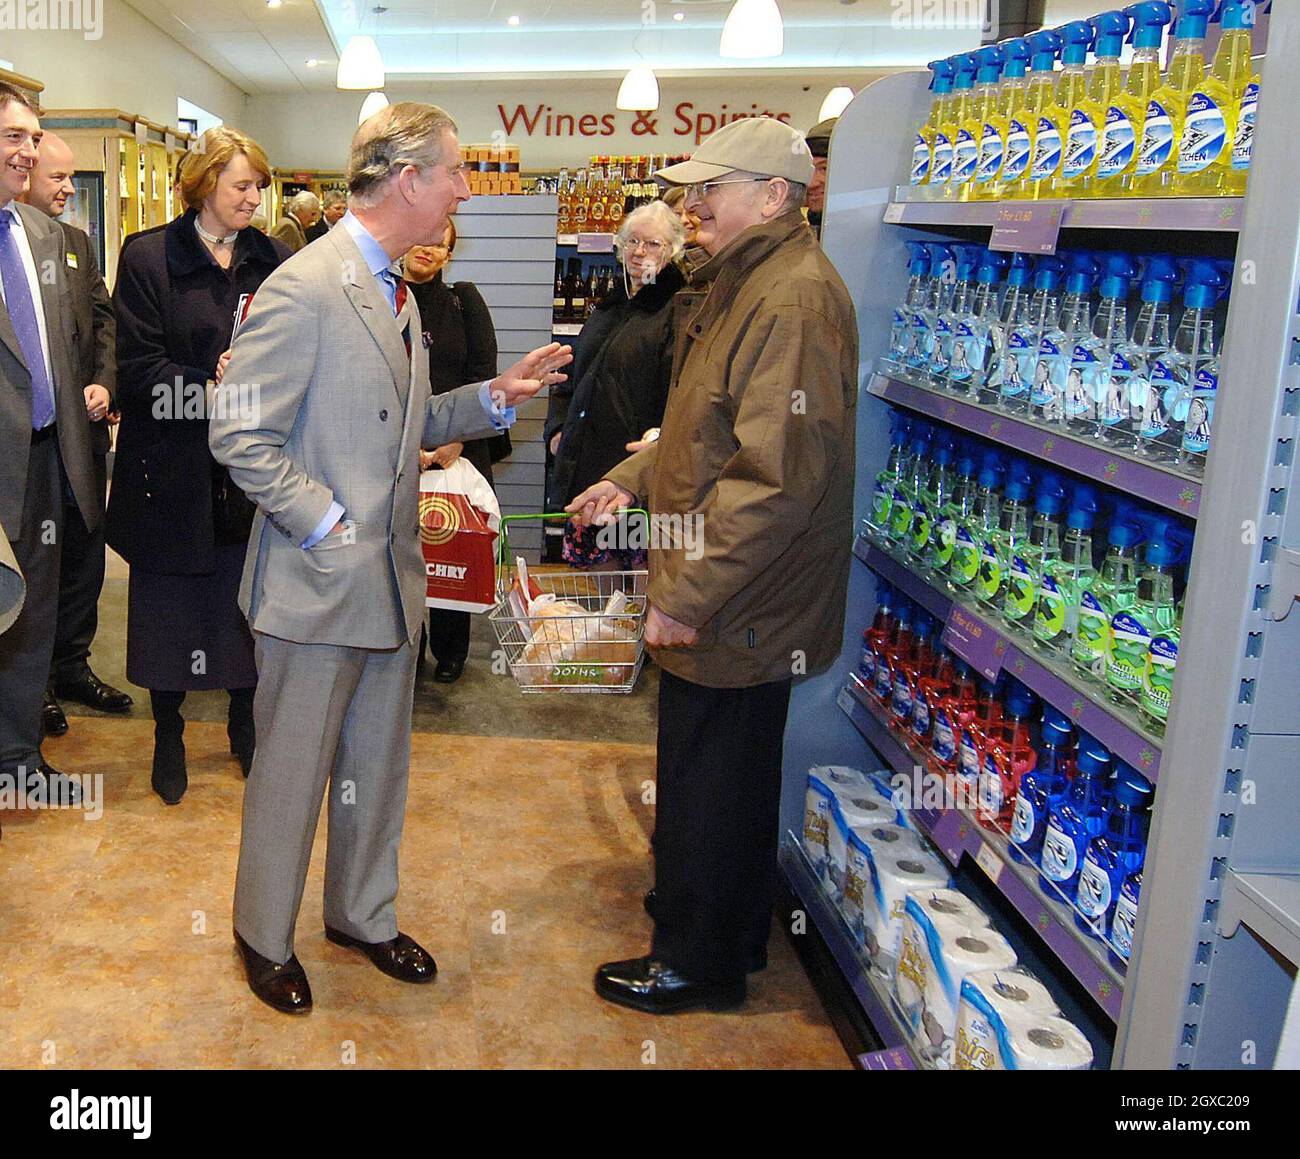 Prince Charles, Prince of Wales talks to a customer during a visit to a supermarket in Keswick, Cumbria, which is committed to local sourcing of produce, meeting suppliers and local farmers on February 5, 2007. Anwar Hussein/EMPICS Entertainment  Stock Photo